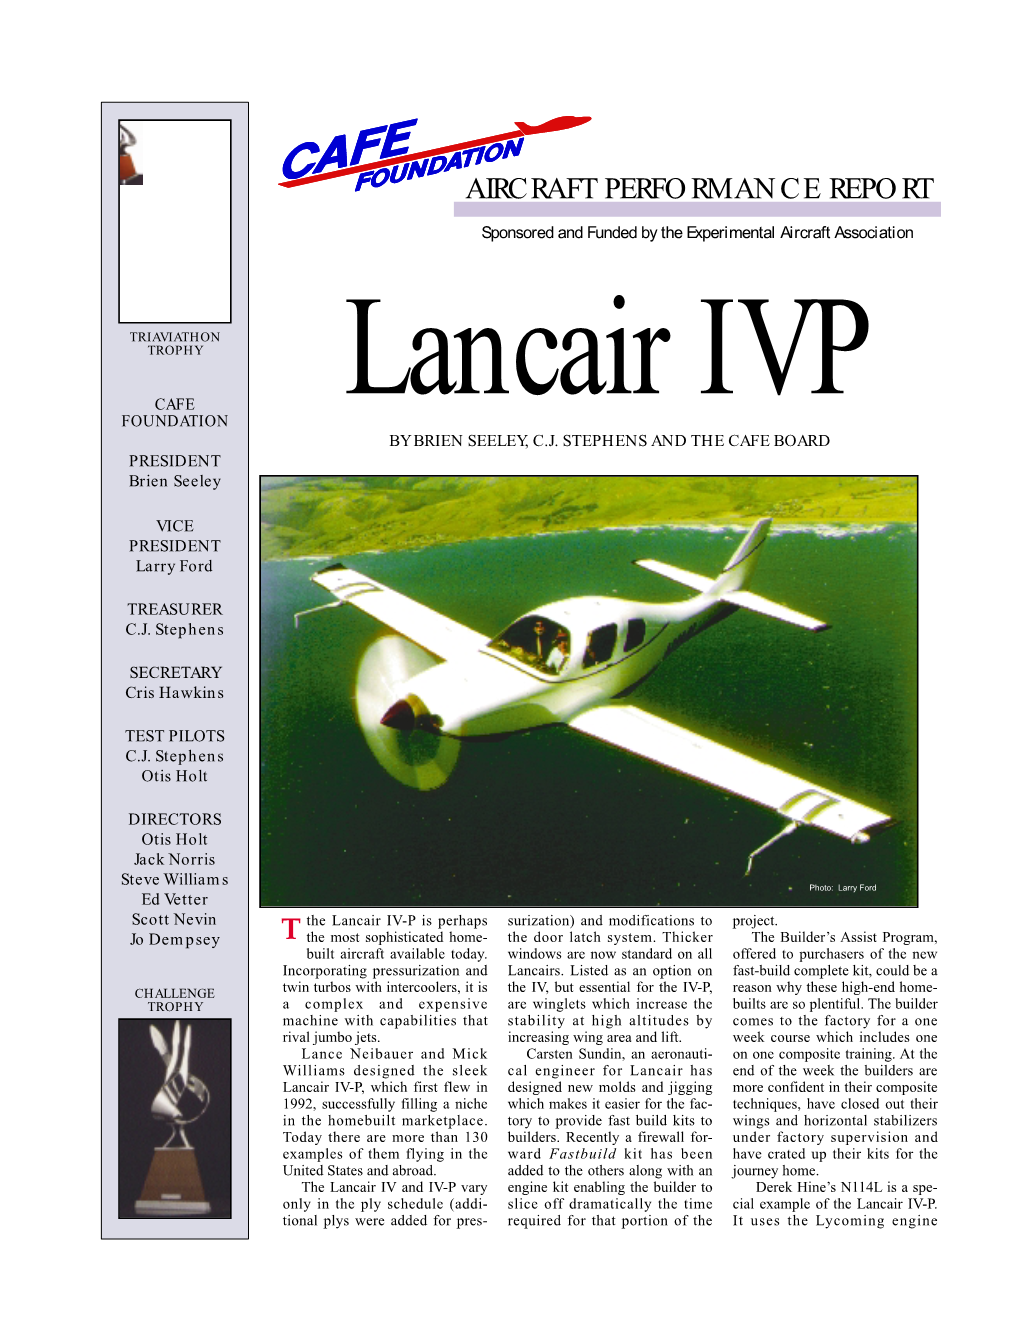 Lancair IV-P Is Perhaps Surization) and Modifications to Project